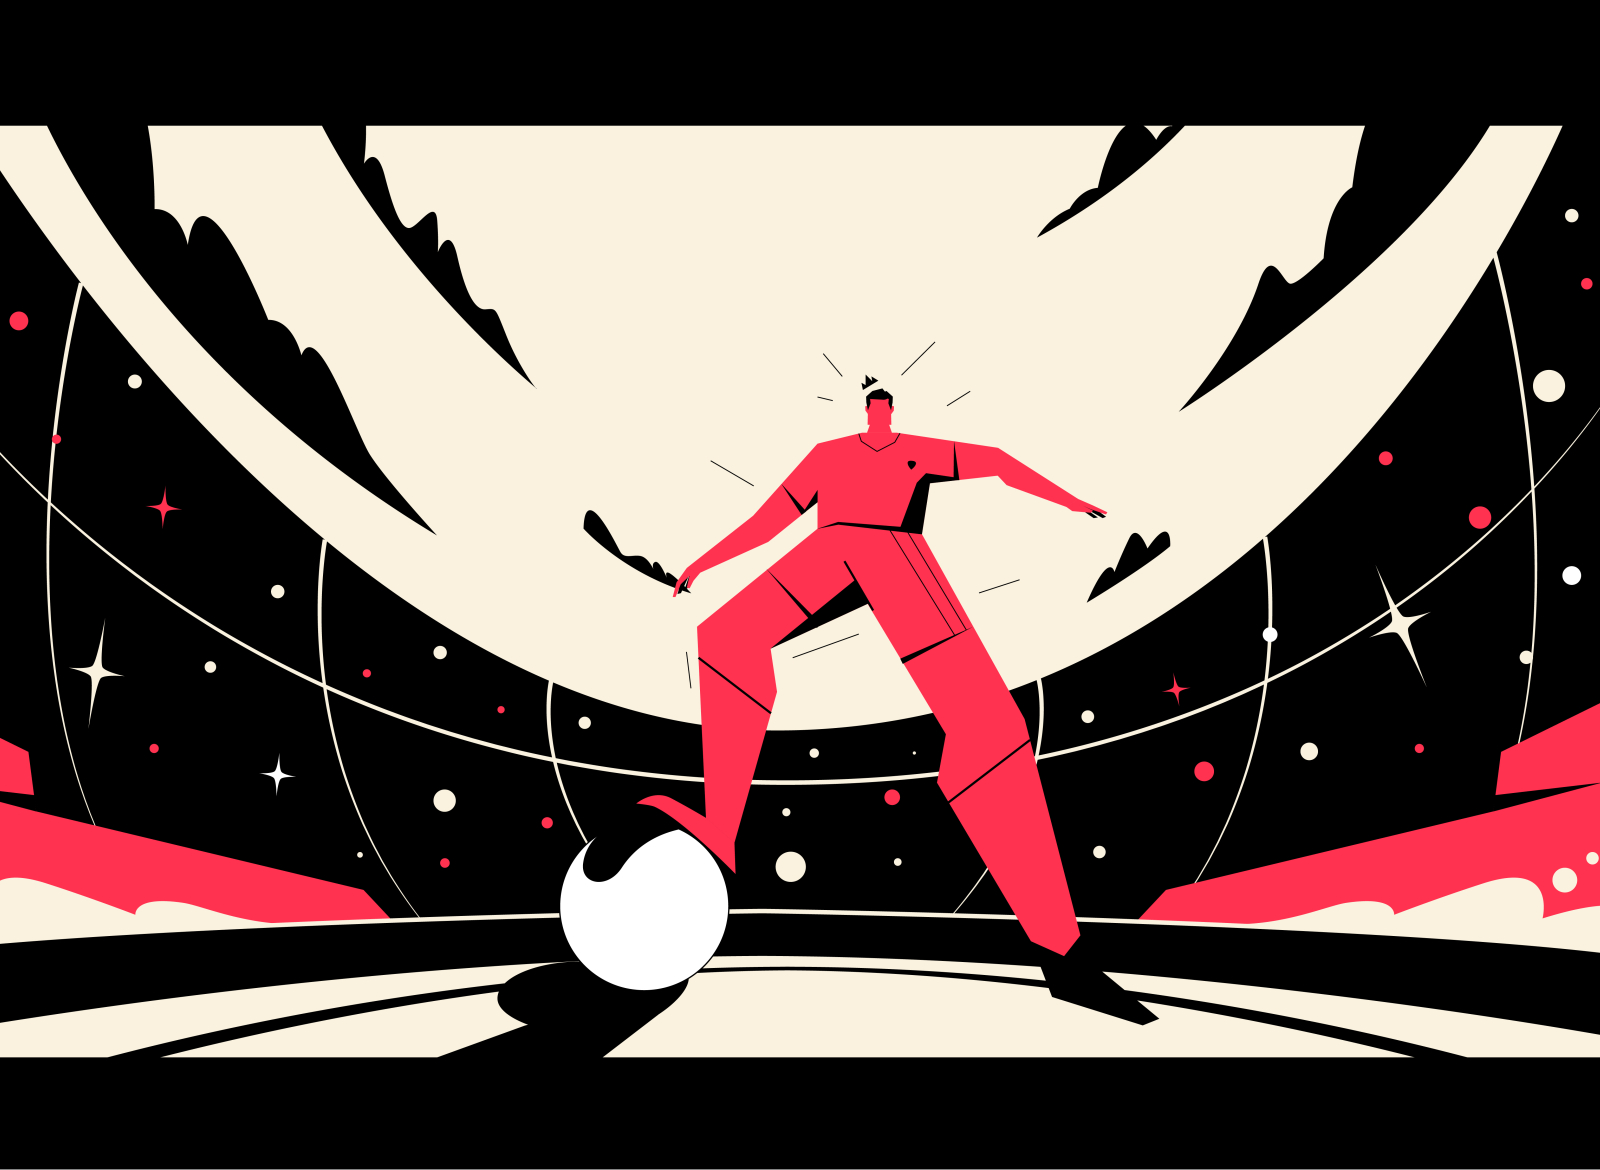 Football player 02 champion sky stadium red cool attack goal wine black vector illustration player